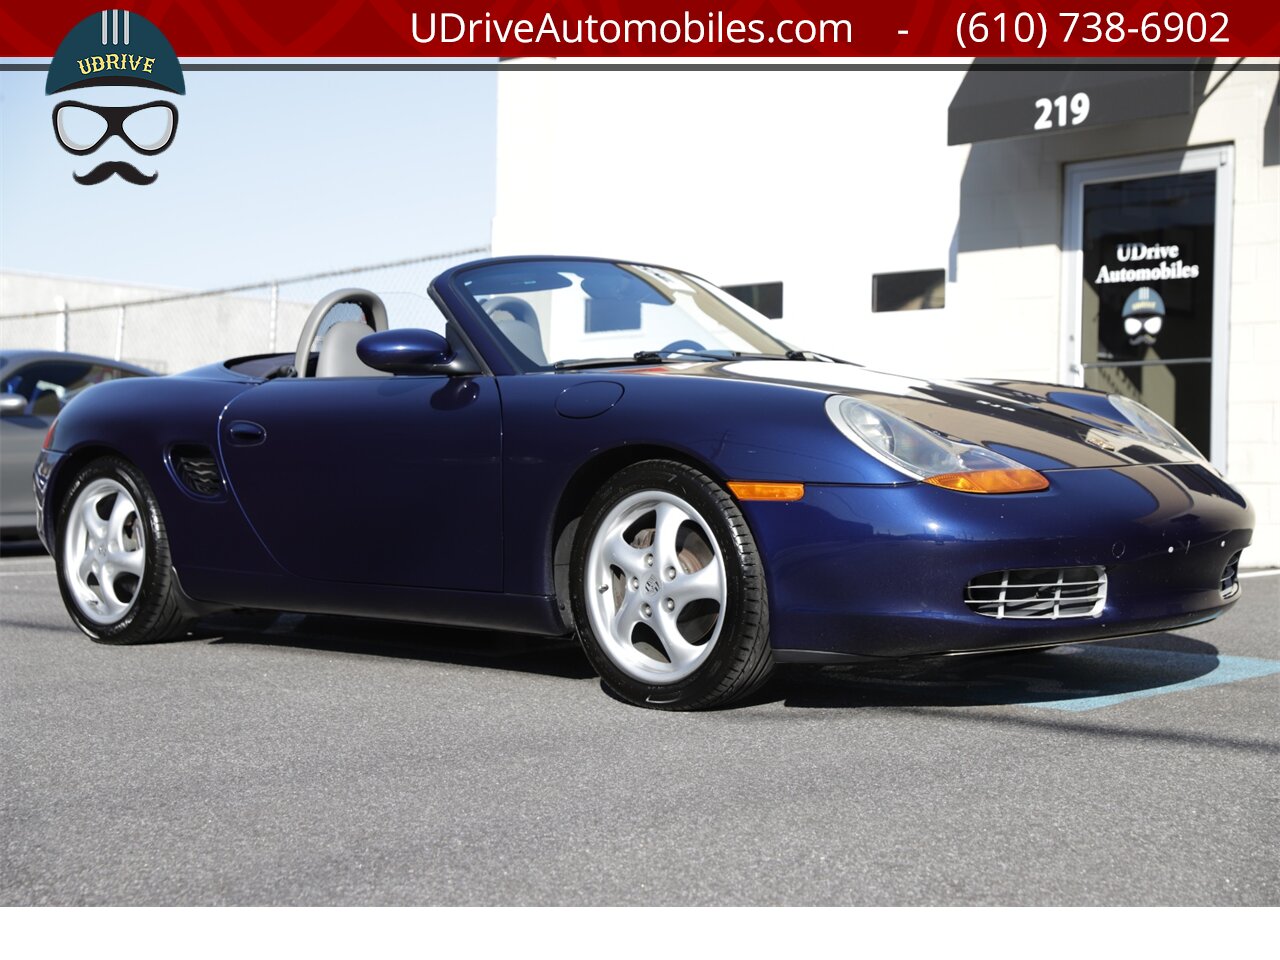 2001 Porsche Boxster 5 Speed Manual Detailed Service History  Same Owner for Last 18 Years Hard Top Included - Photo 12 - West Chester, PA 19382